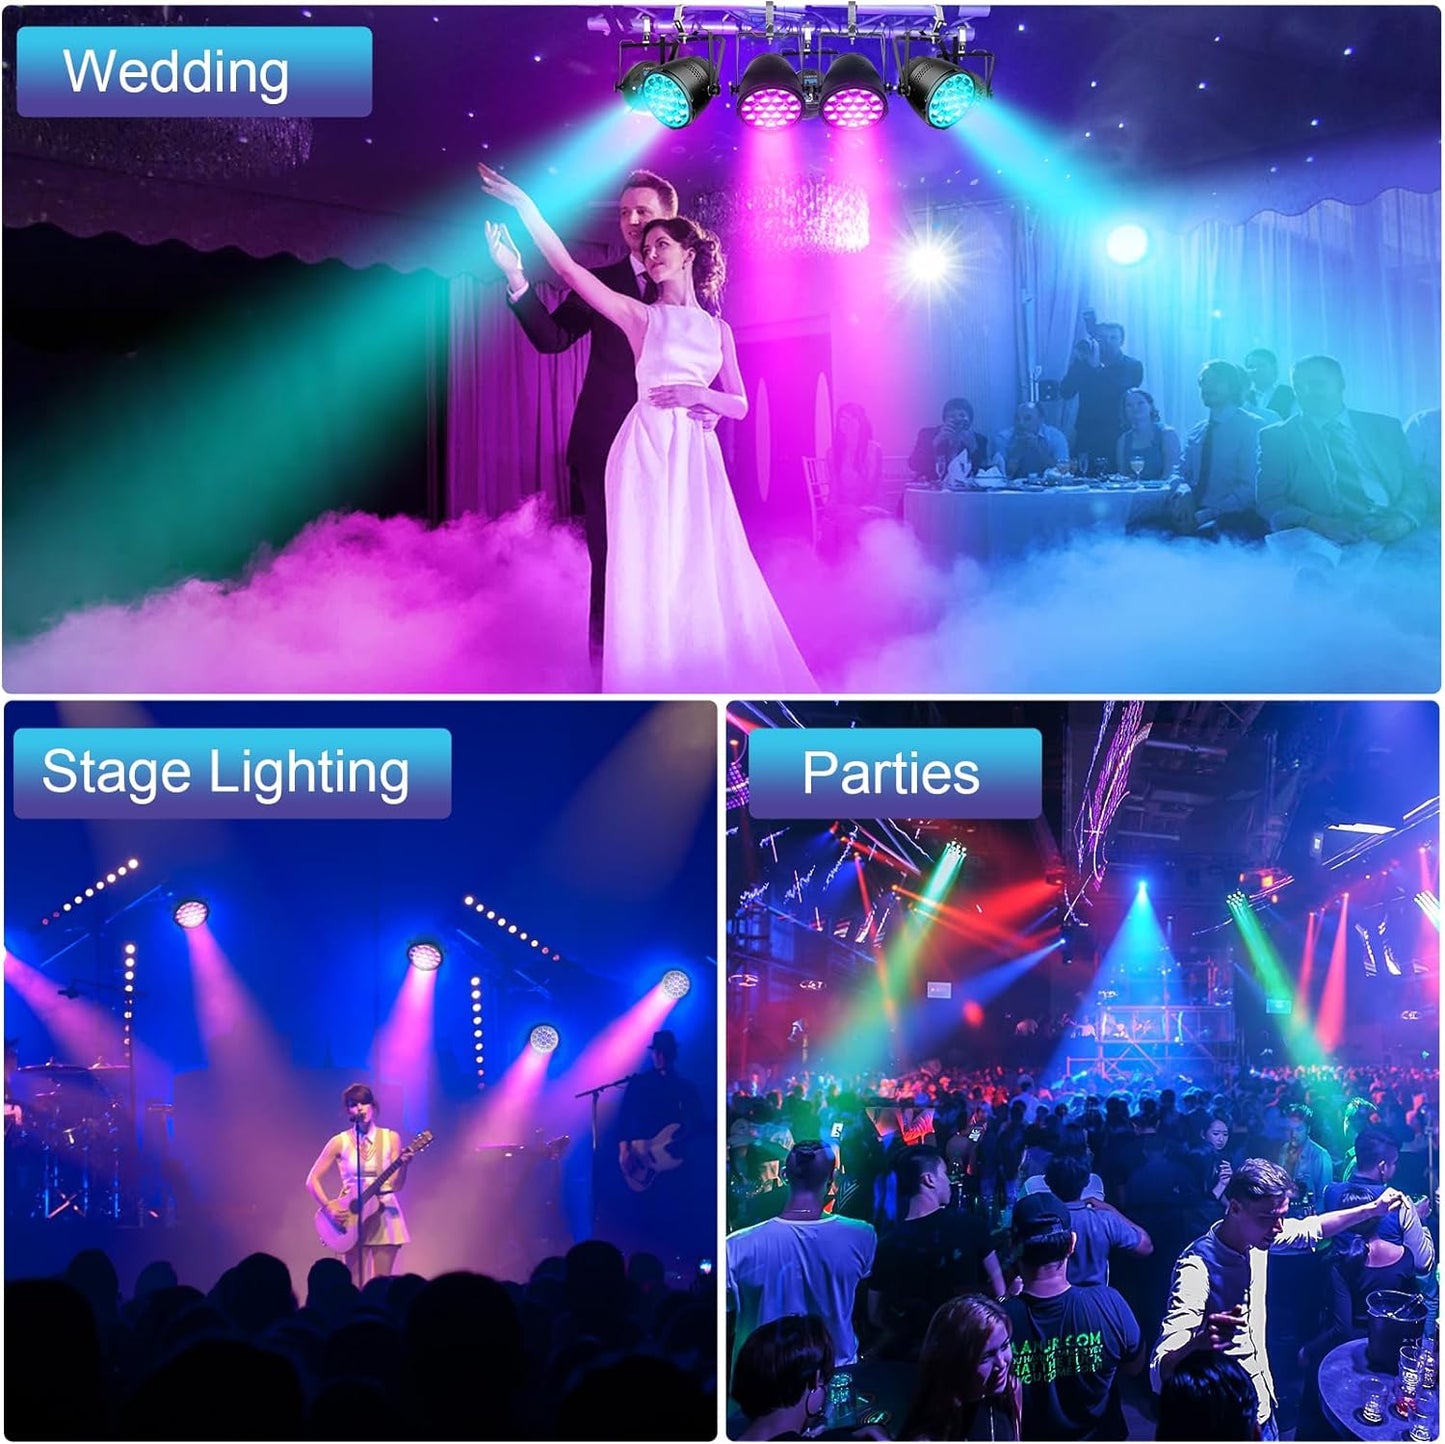 LED Par Light Motorized Zoom: 250W 4in1 RGBW High Power Professional Stage Par Light Sound Activated DMX Control Uplights for Events DJ Live Show Halloween Xmas Wedding Party Church Stag